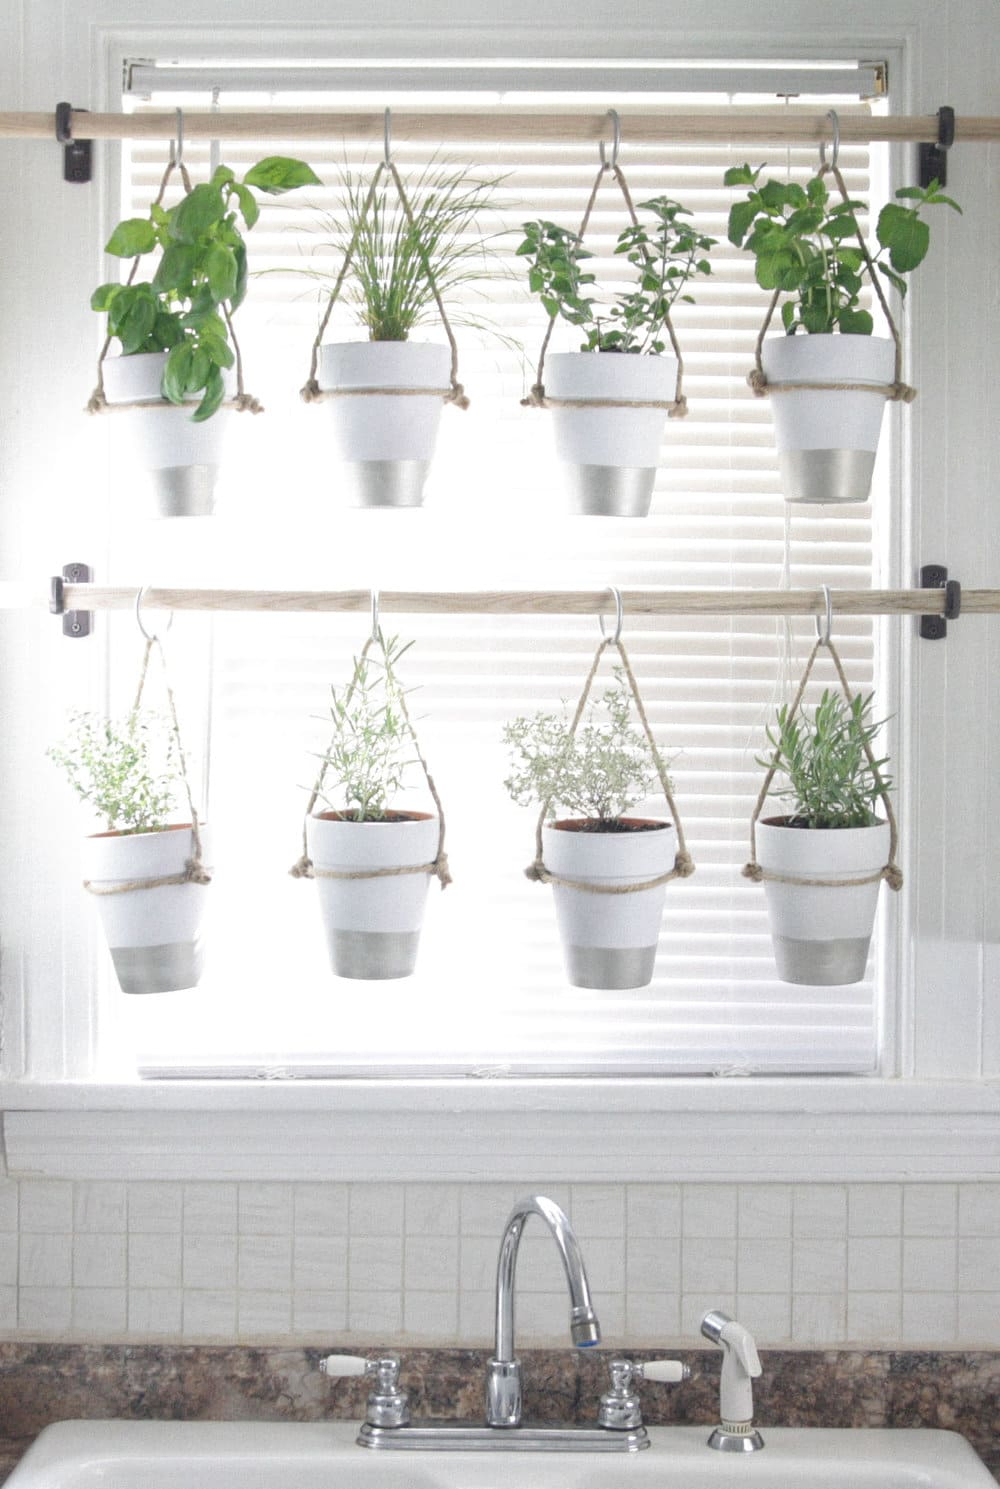 6.Simphome.com Hanging White Indoor Potted Herb Garden